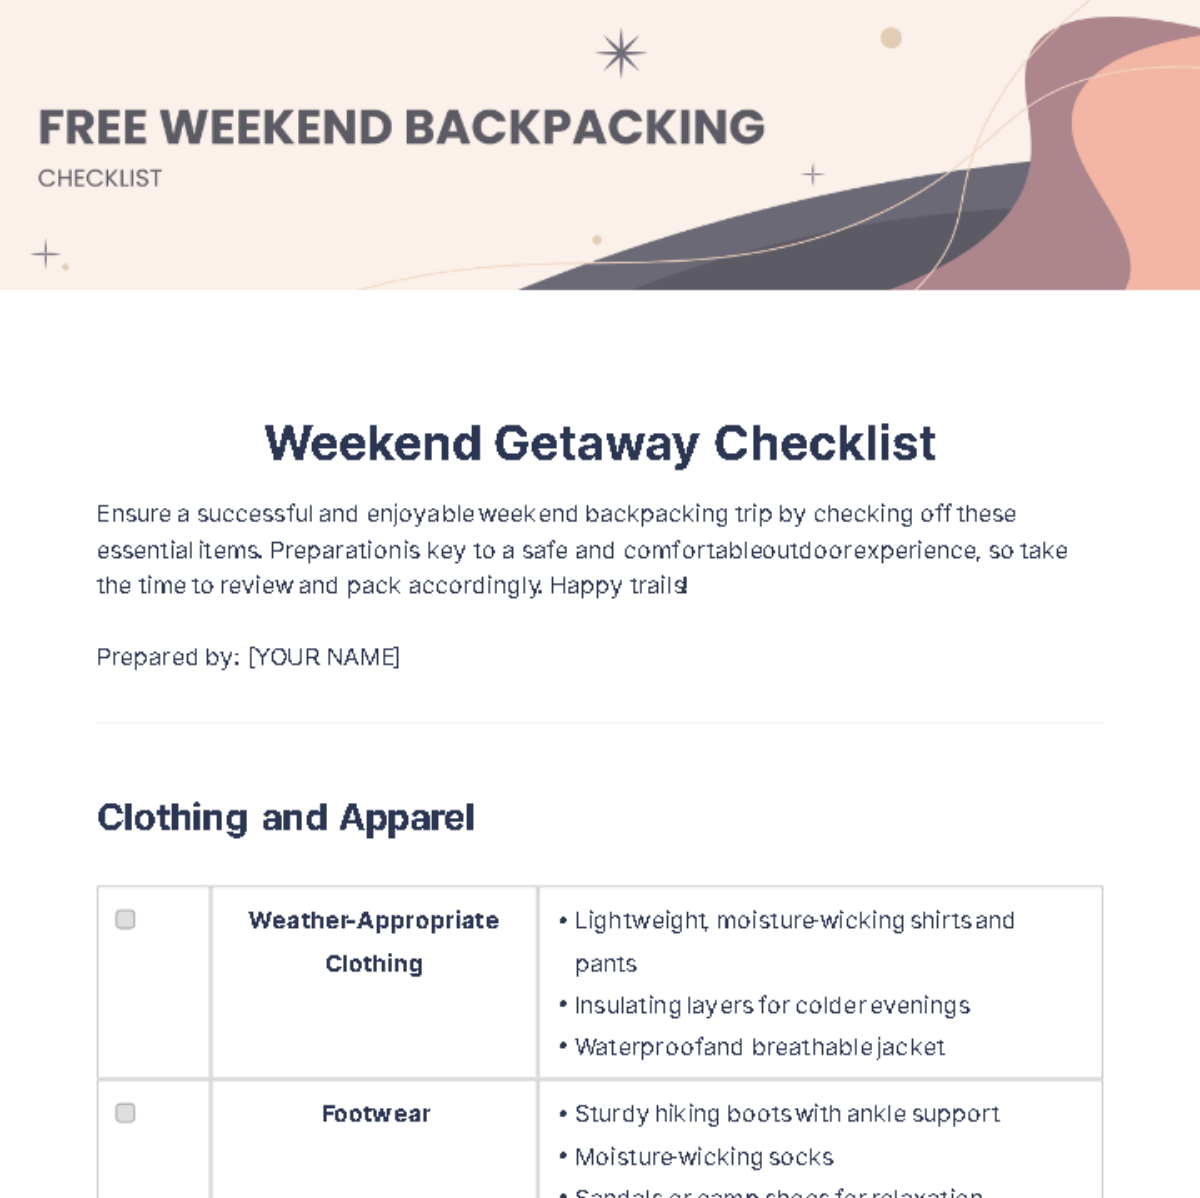 Weekend Backpacking Checklist Template